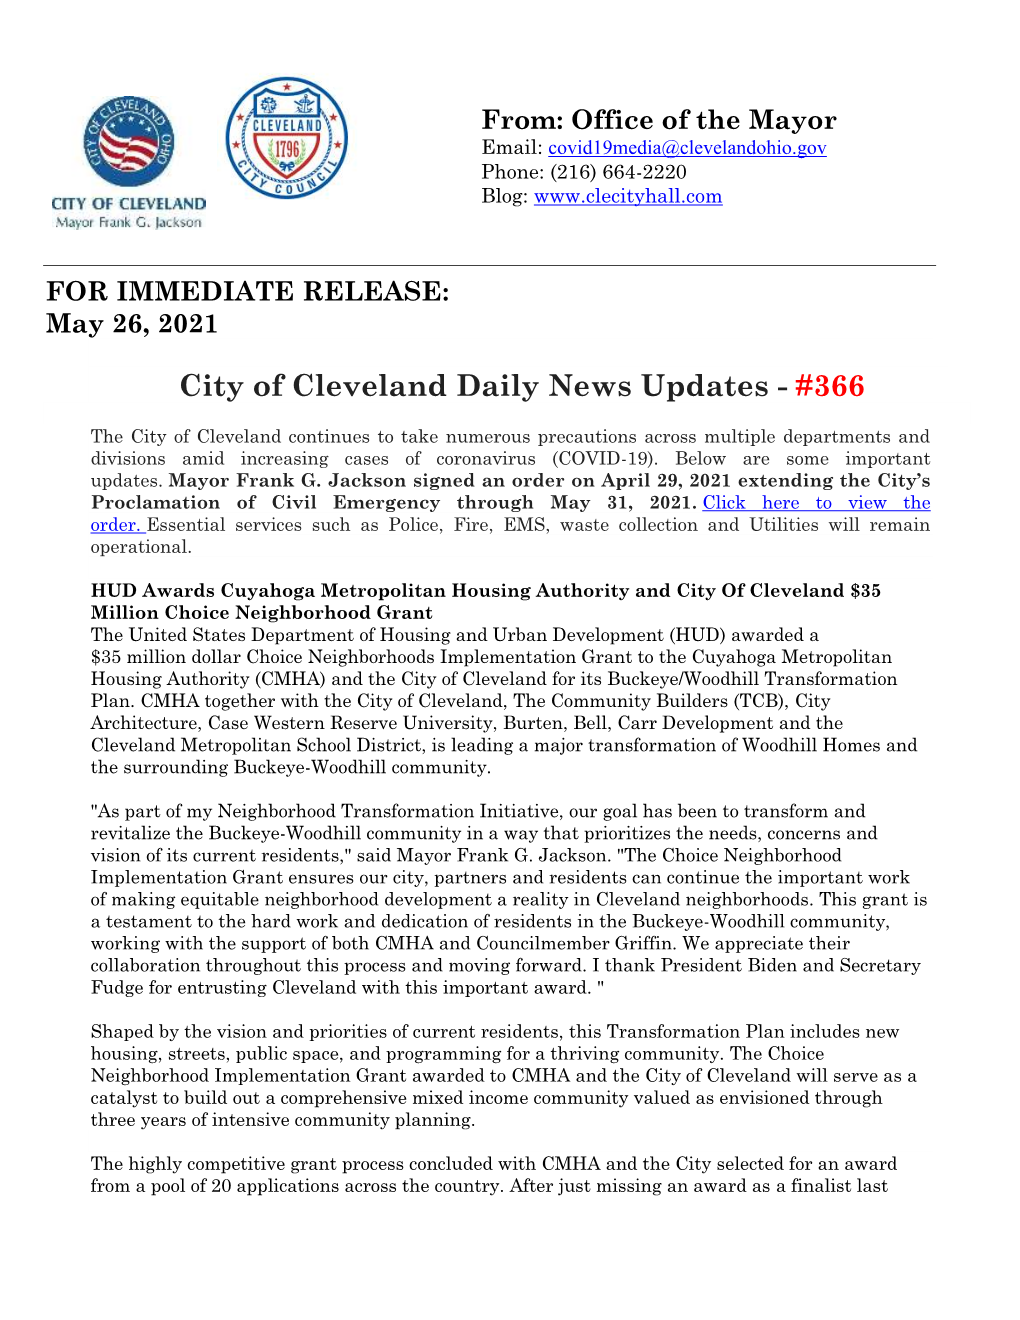 City of Cleveland Daily News Updates - #366